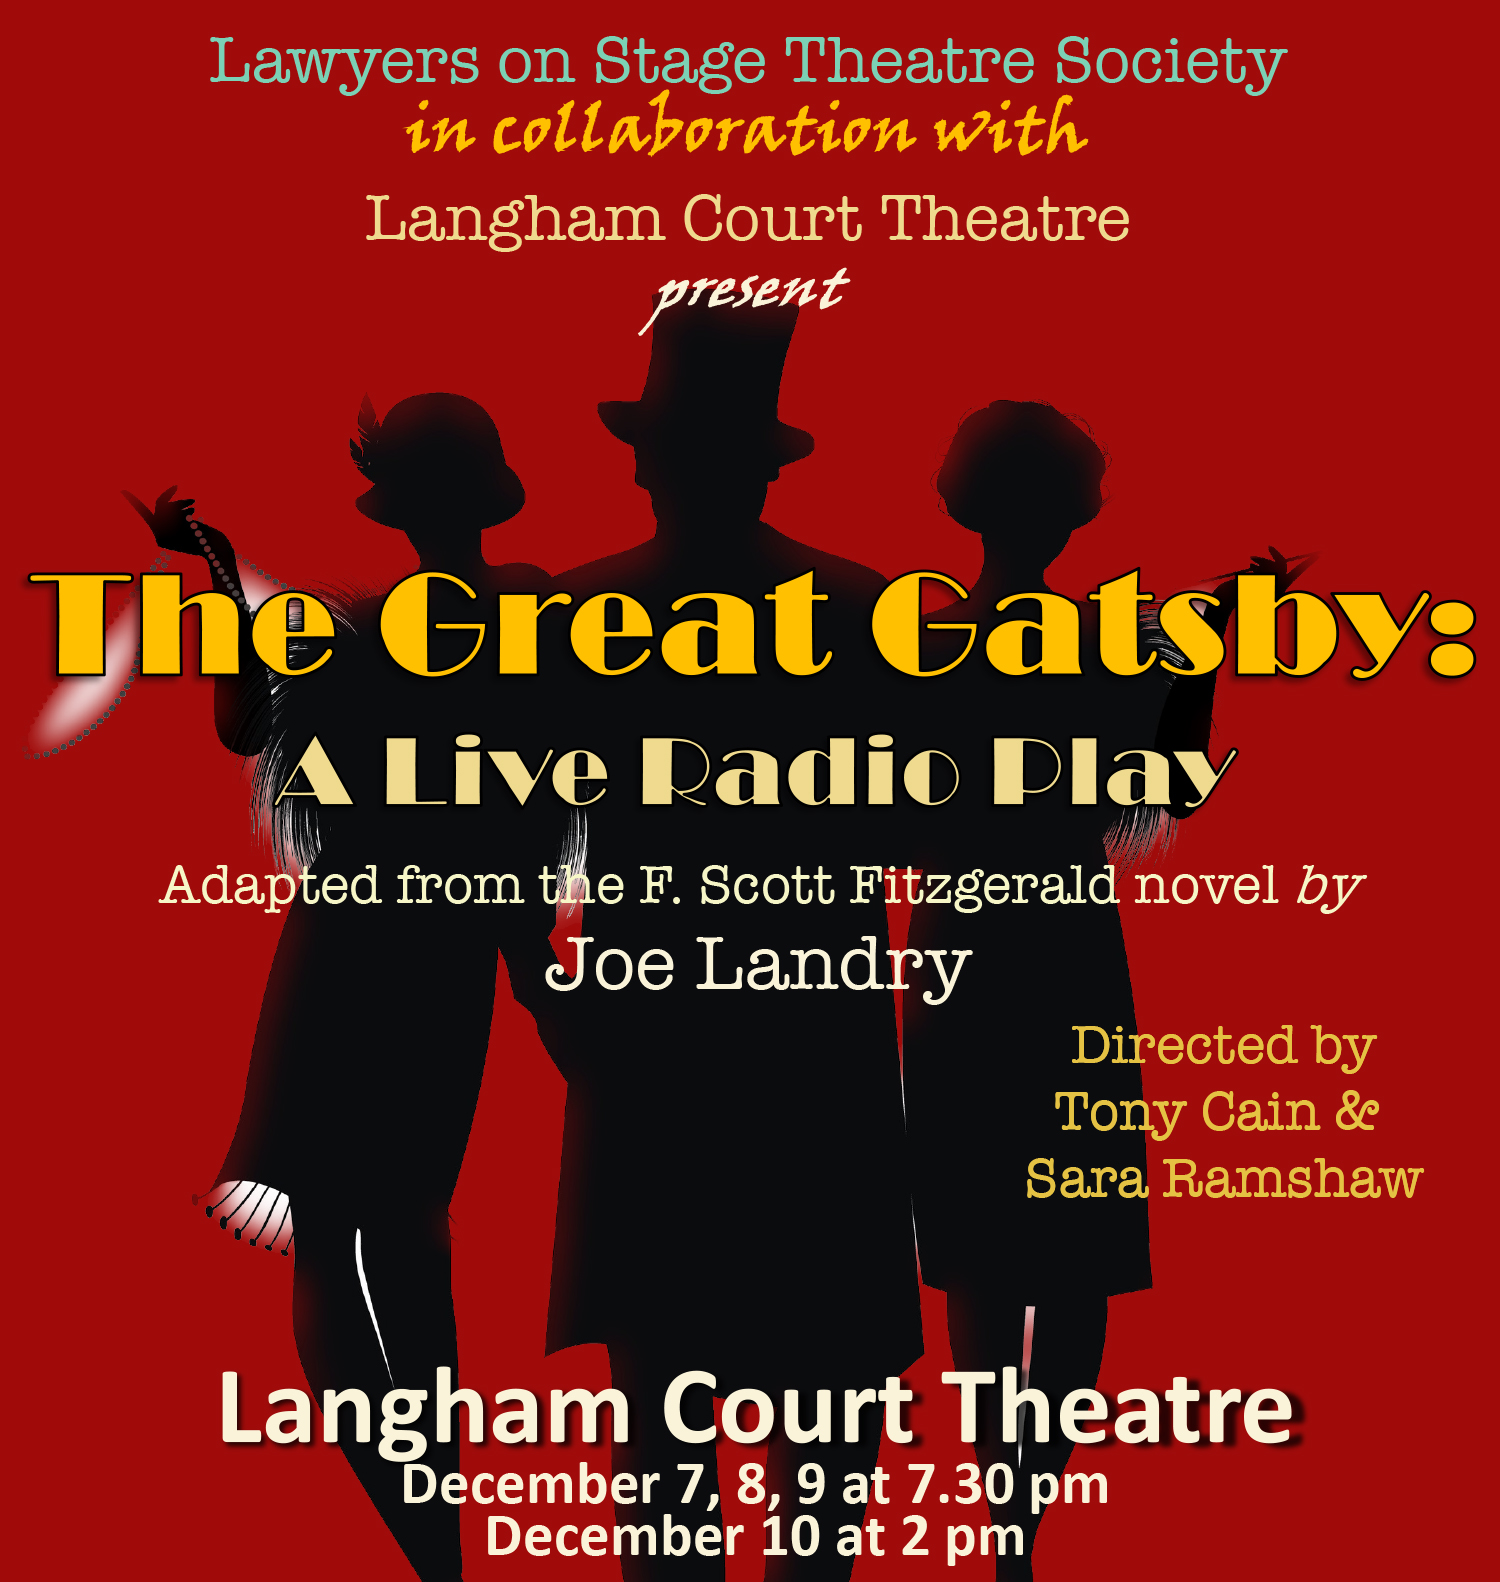 The Great Gatsby at Langham Court Theatre